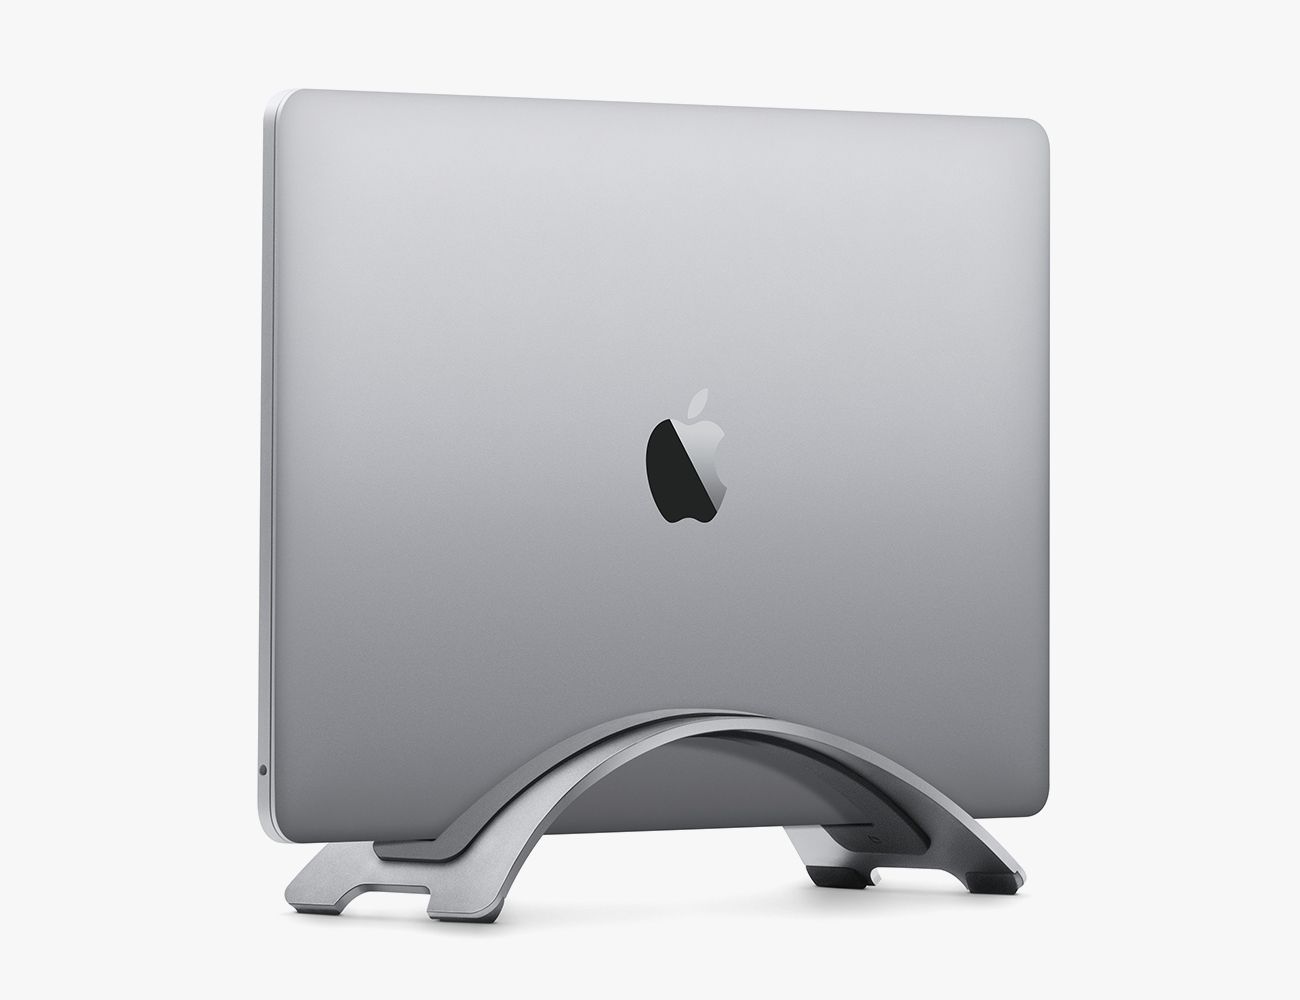 Office gadget guide for the ultimate Apple WFH setup » Gadget Flow